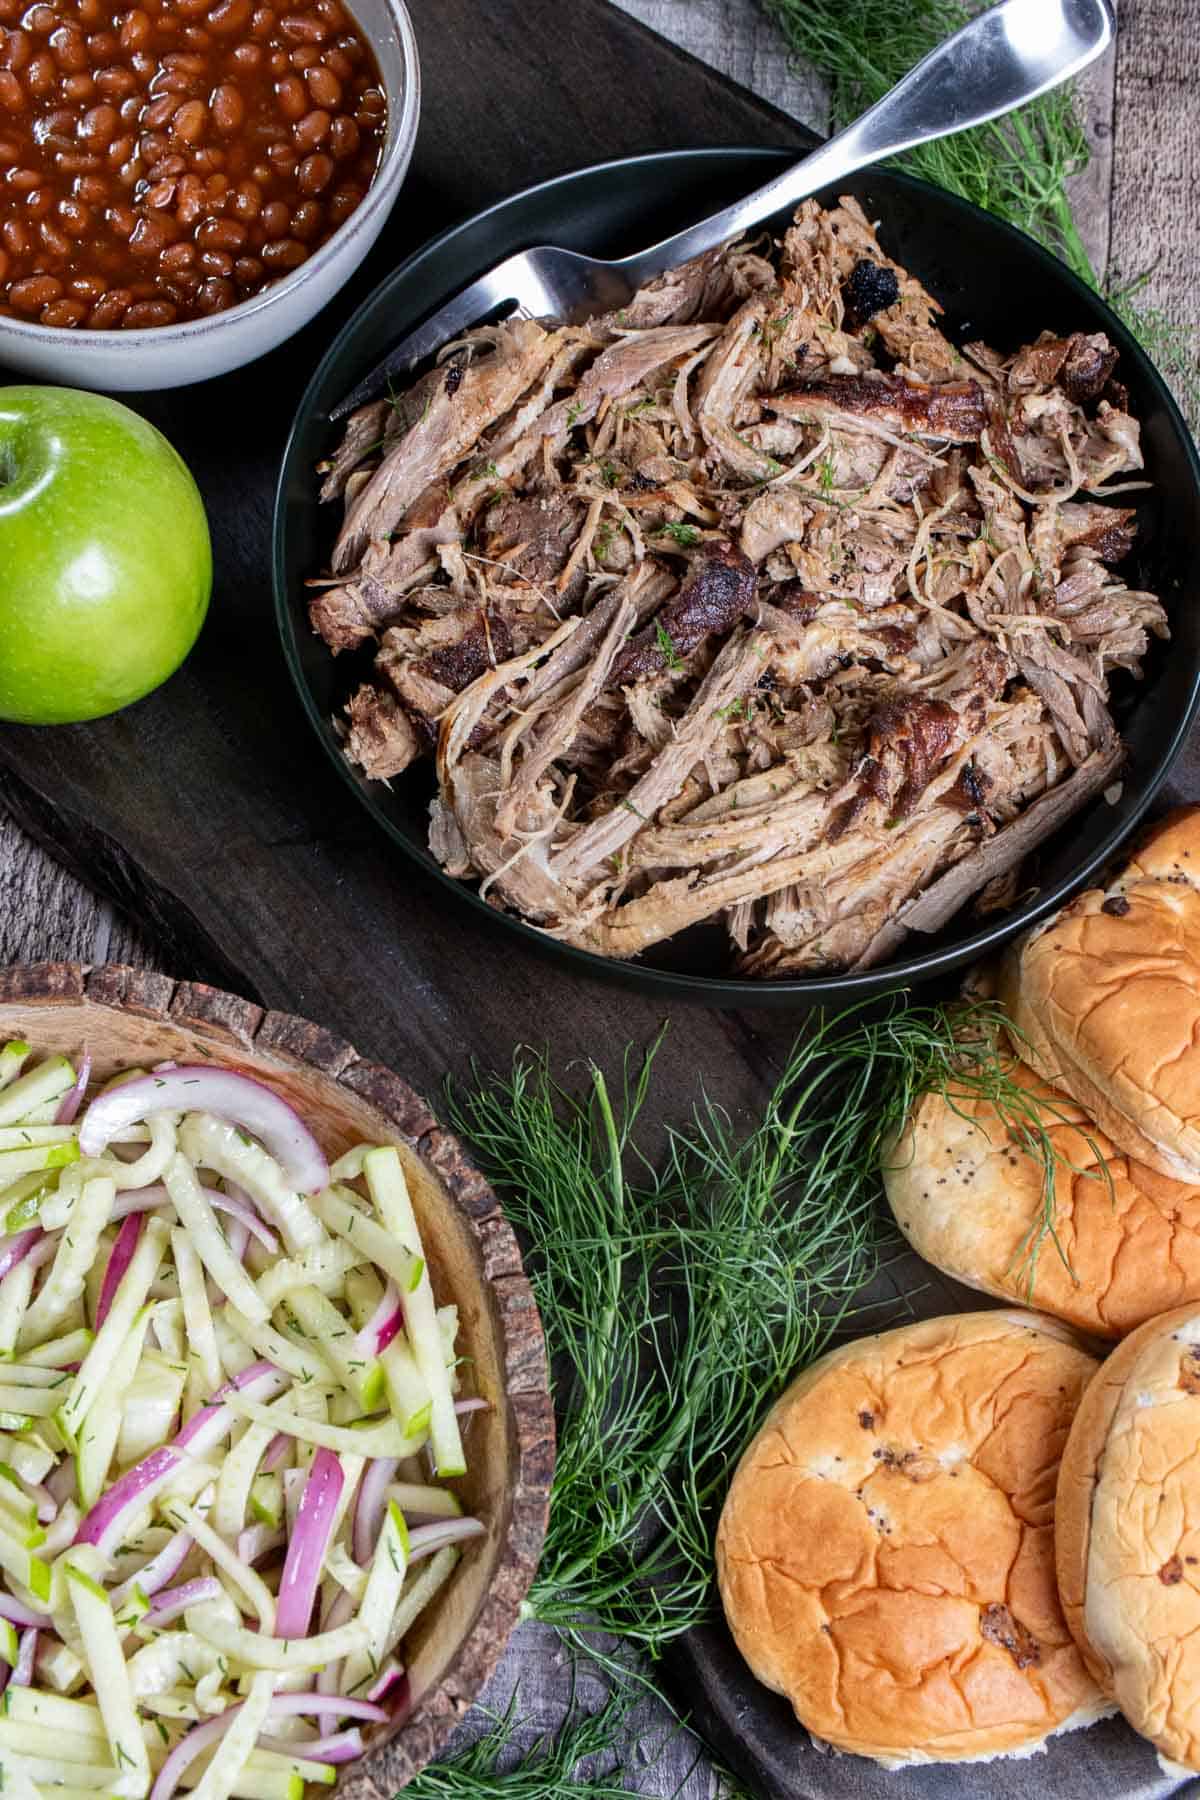 Angled view of cider braised pork shoulder, served with onion buns, fennel apple slaw, and baked beans.